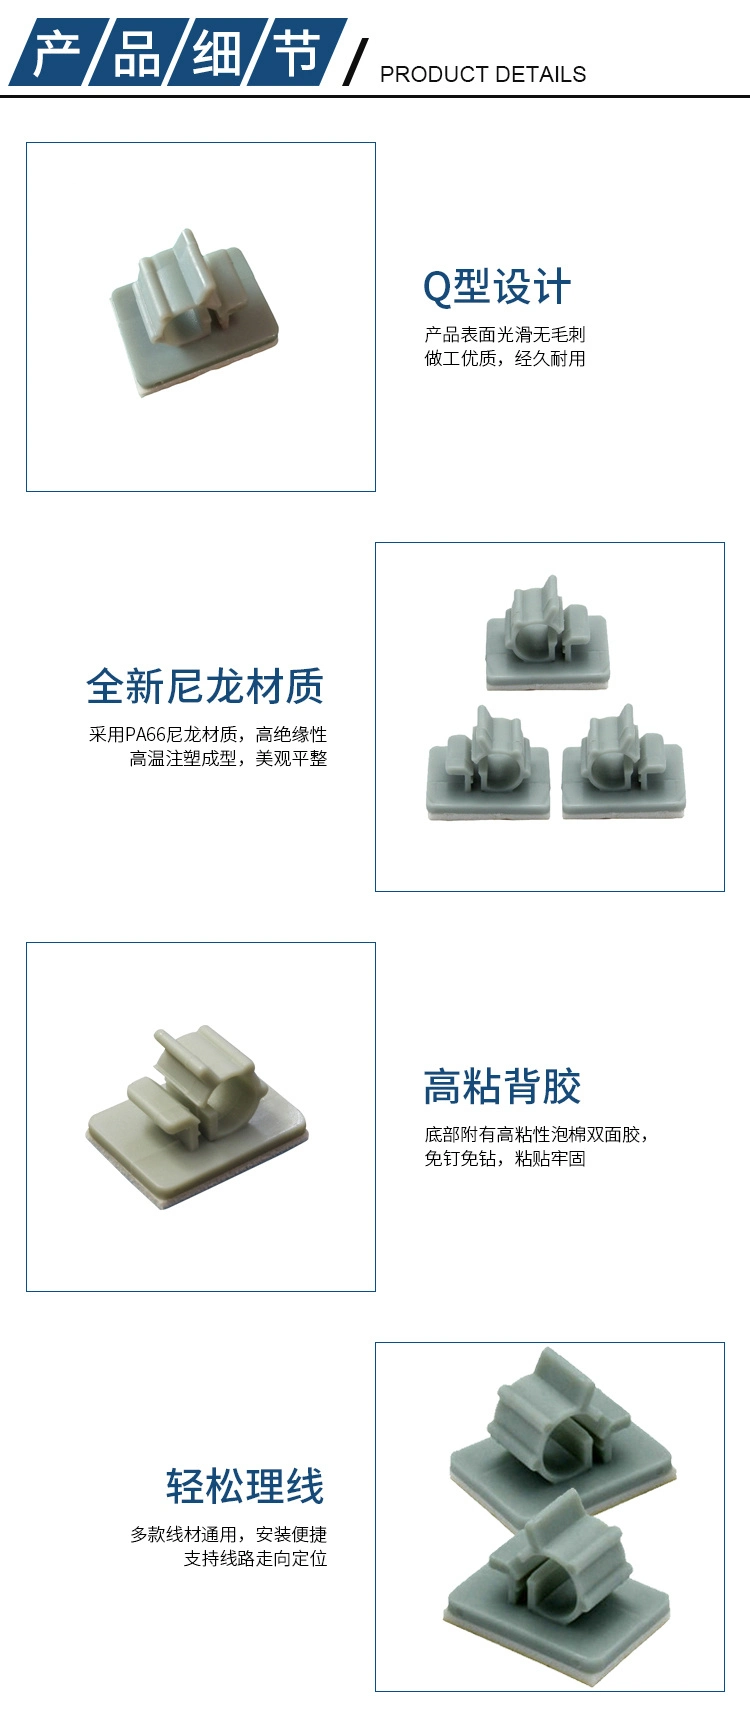 Wire and Cable Accessories Hole Free Cable Fixing Clips, Heyingcn Self Adhesive Clamp Seat Nylon Wire Mount